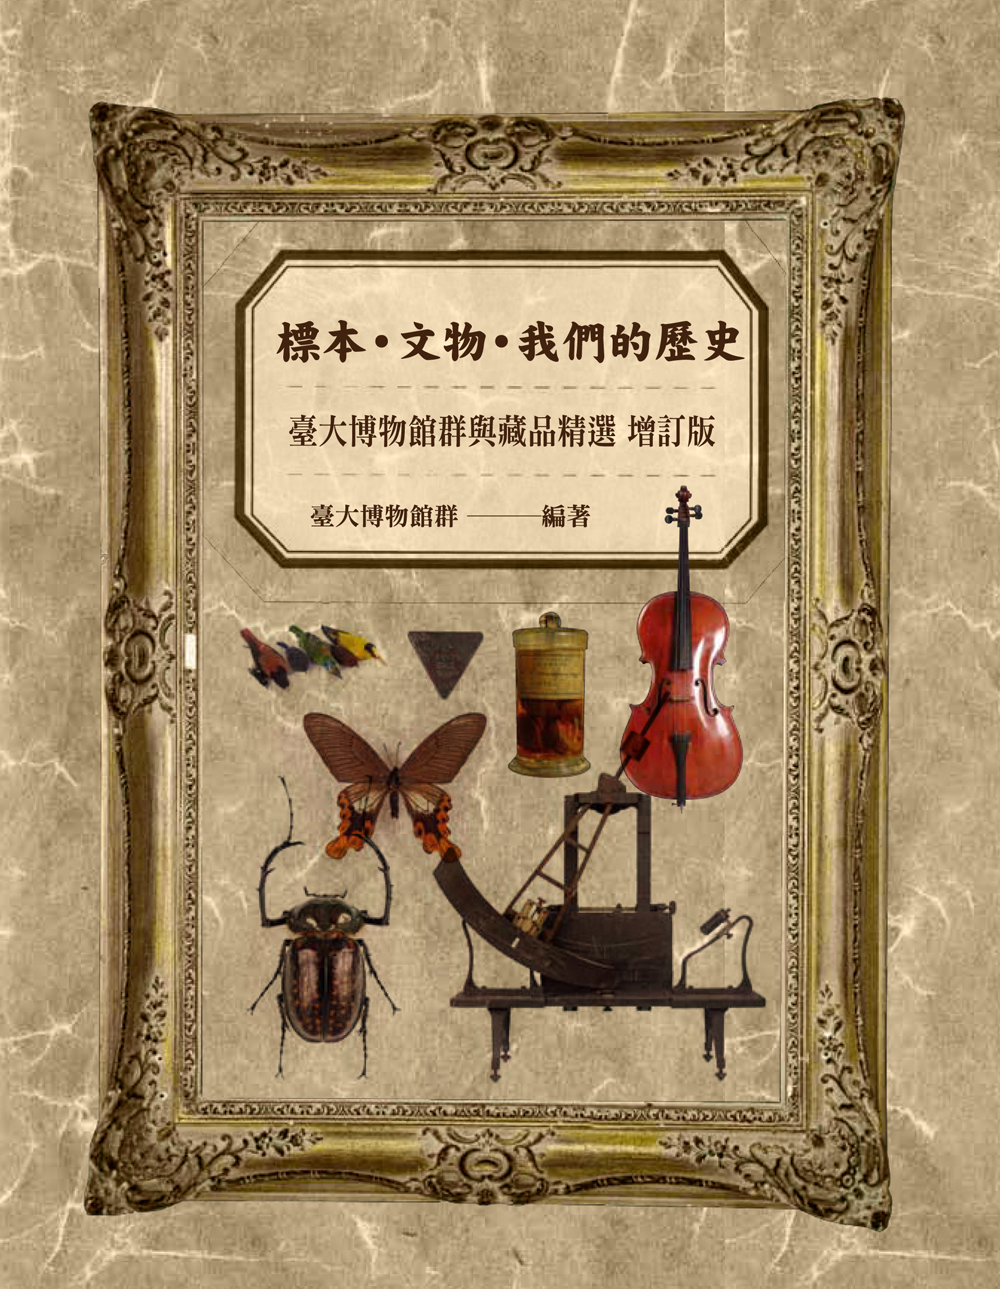 Stories and Selections from the National Taiwan University Museums (Revised edition)